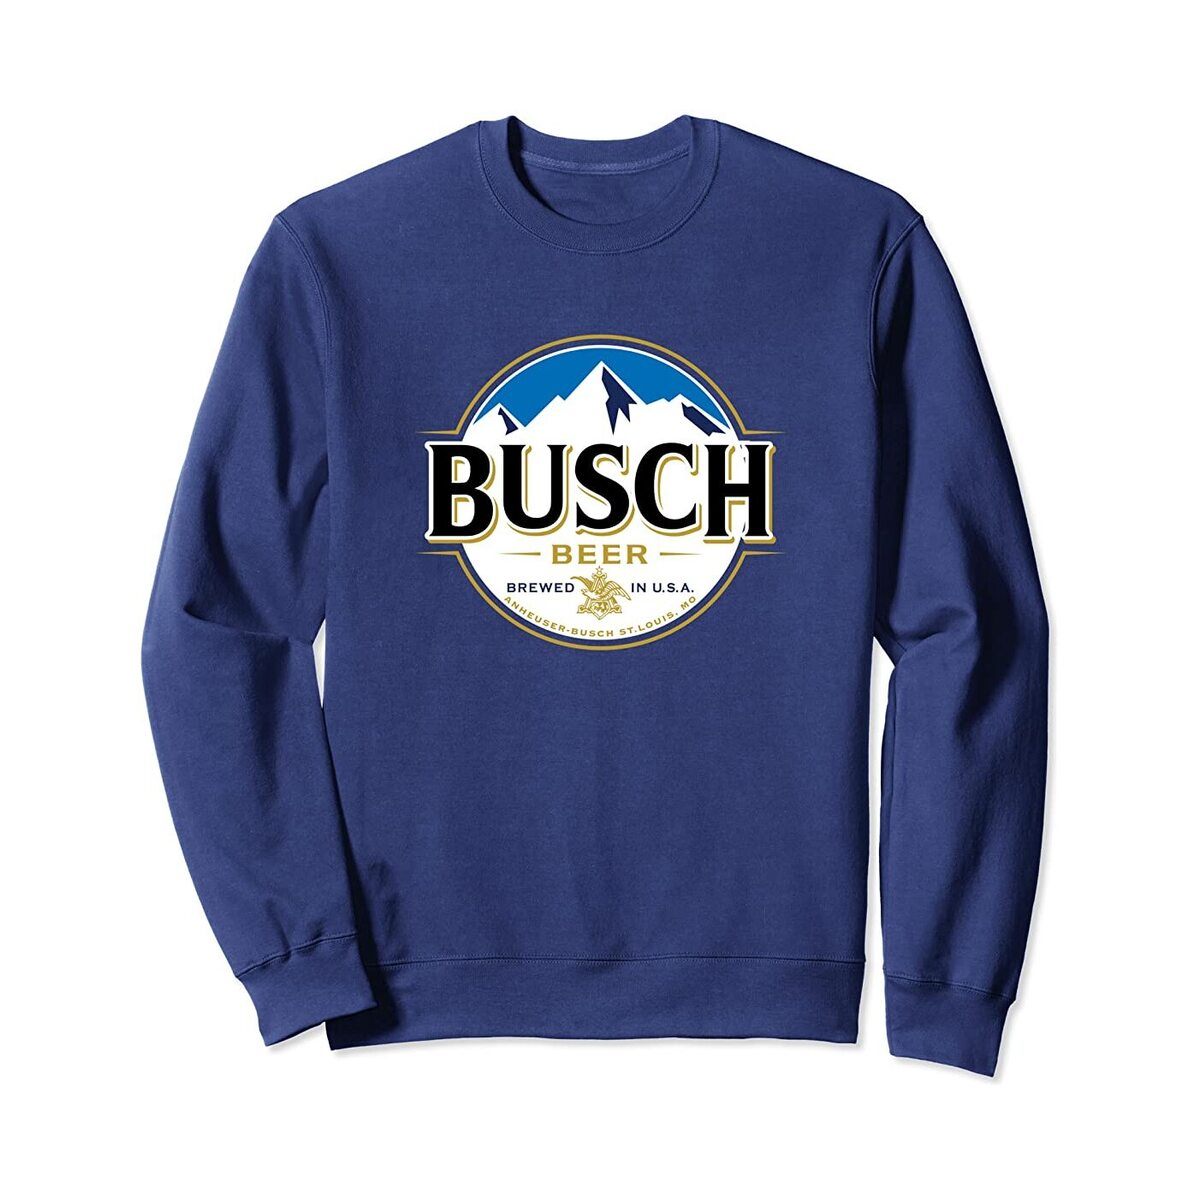 Busch Beer Ugly Christmas Sweater Gift For Son From Father